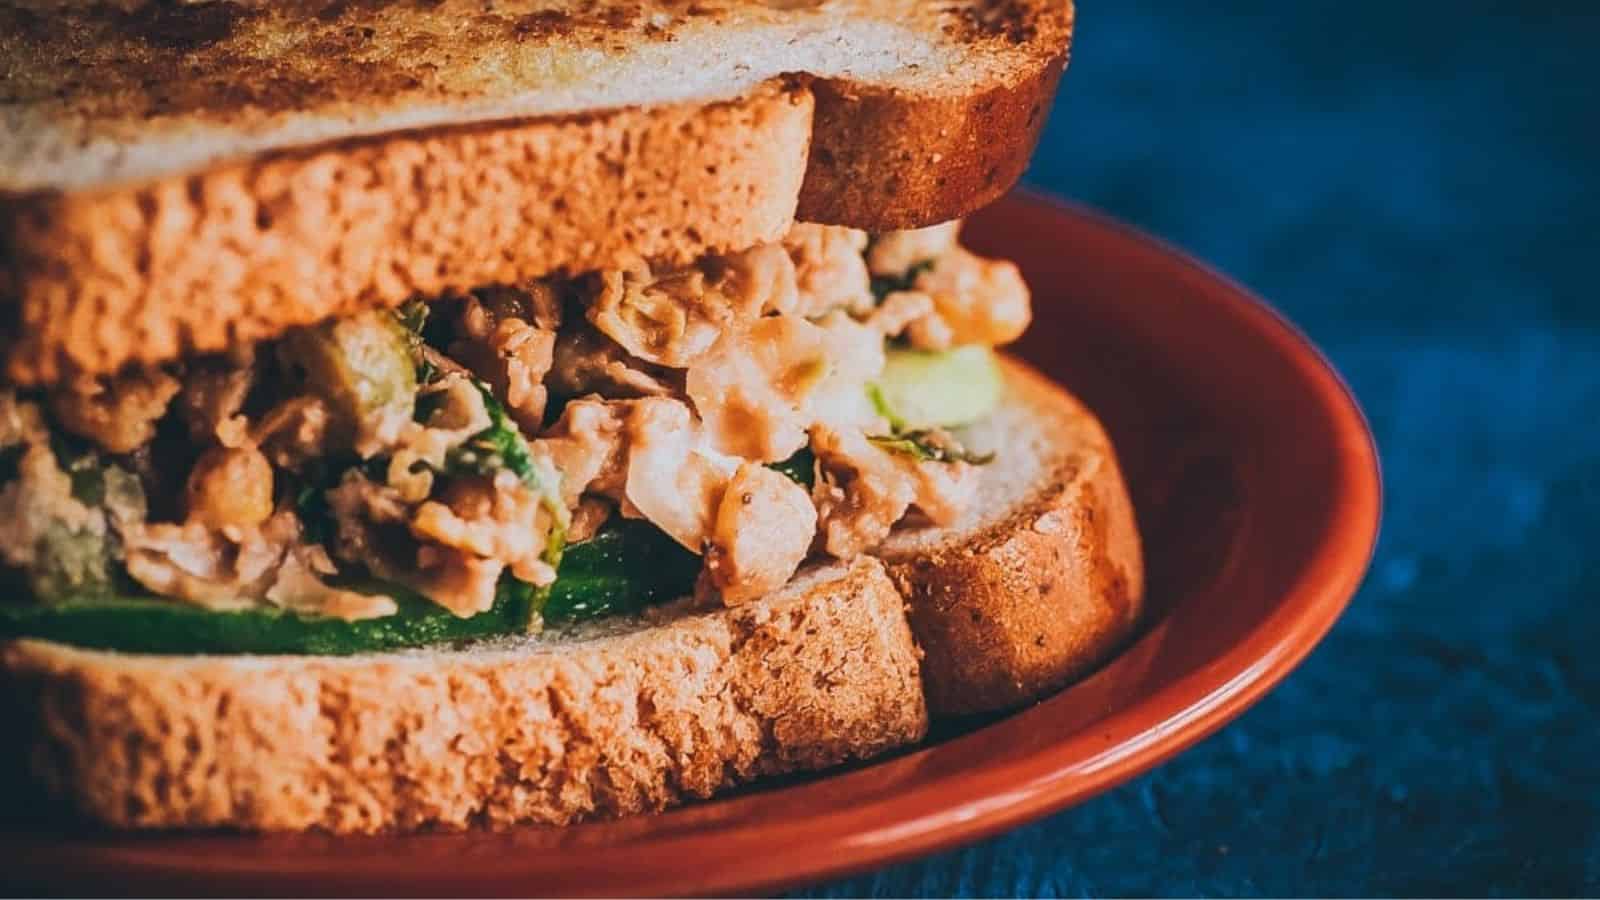 Zesty smashed chickpea salad sandwich on a red plate.